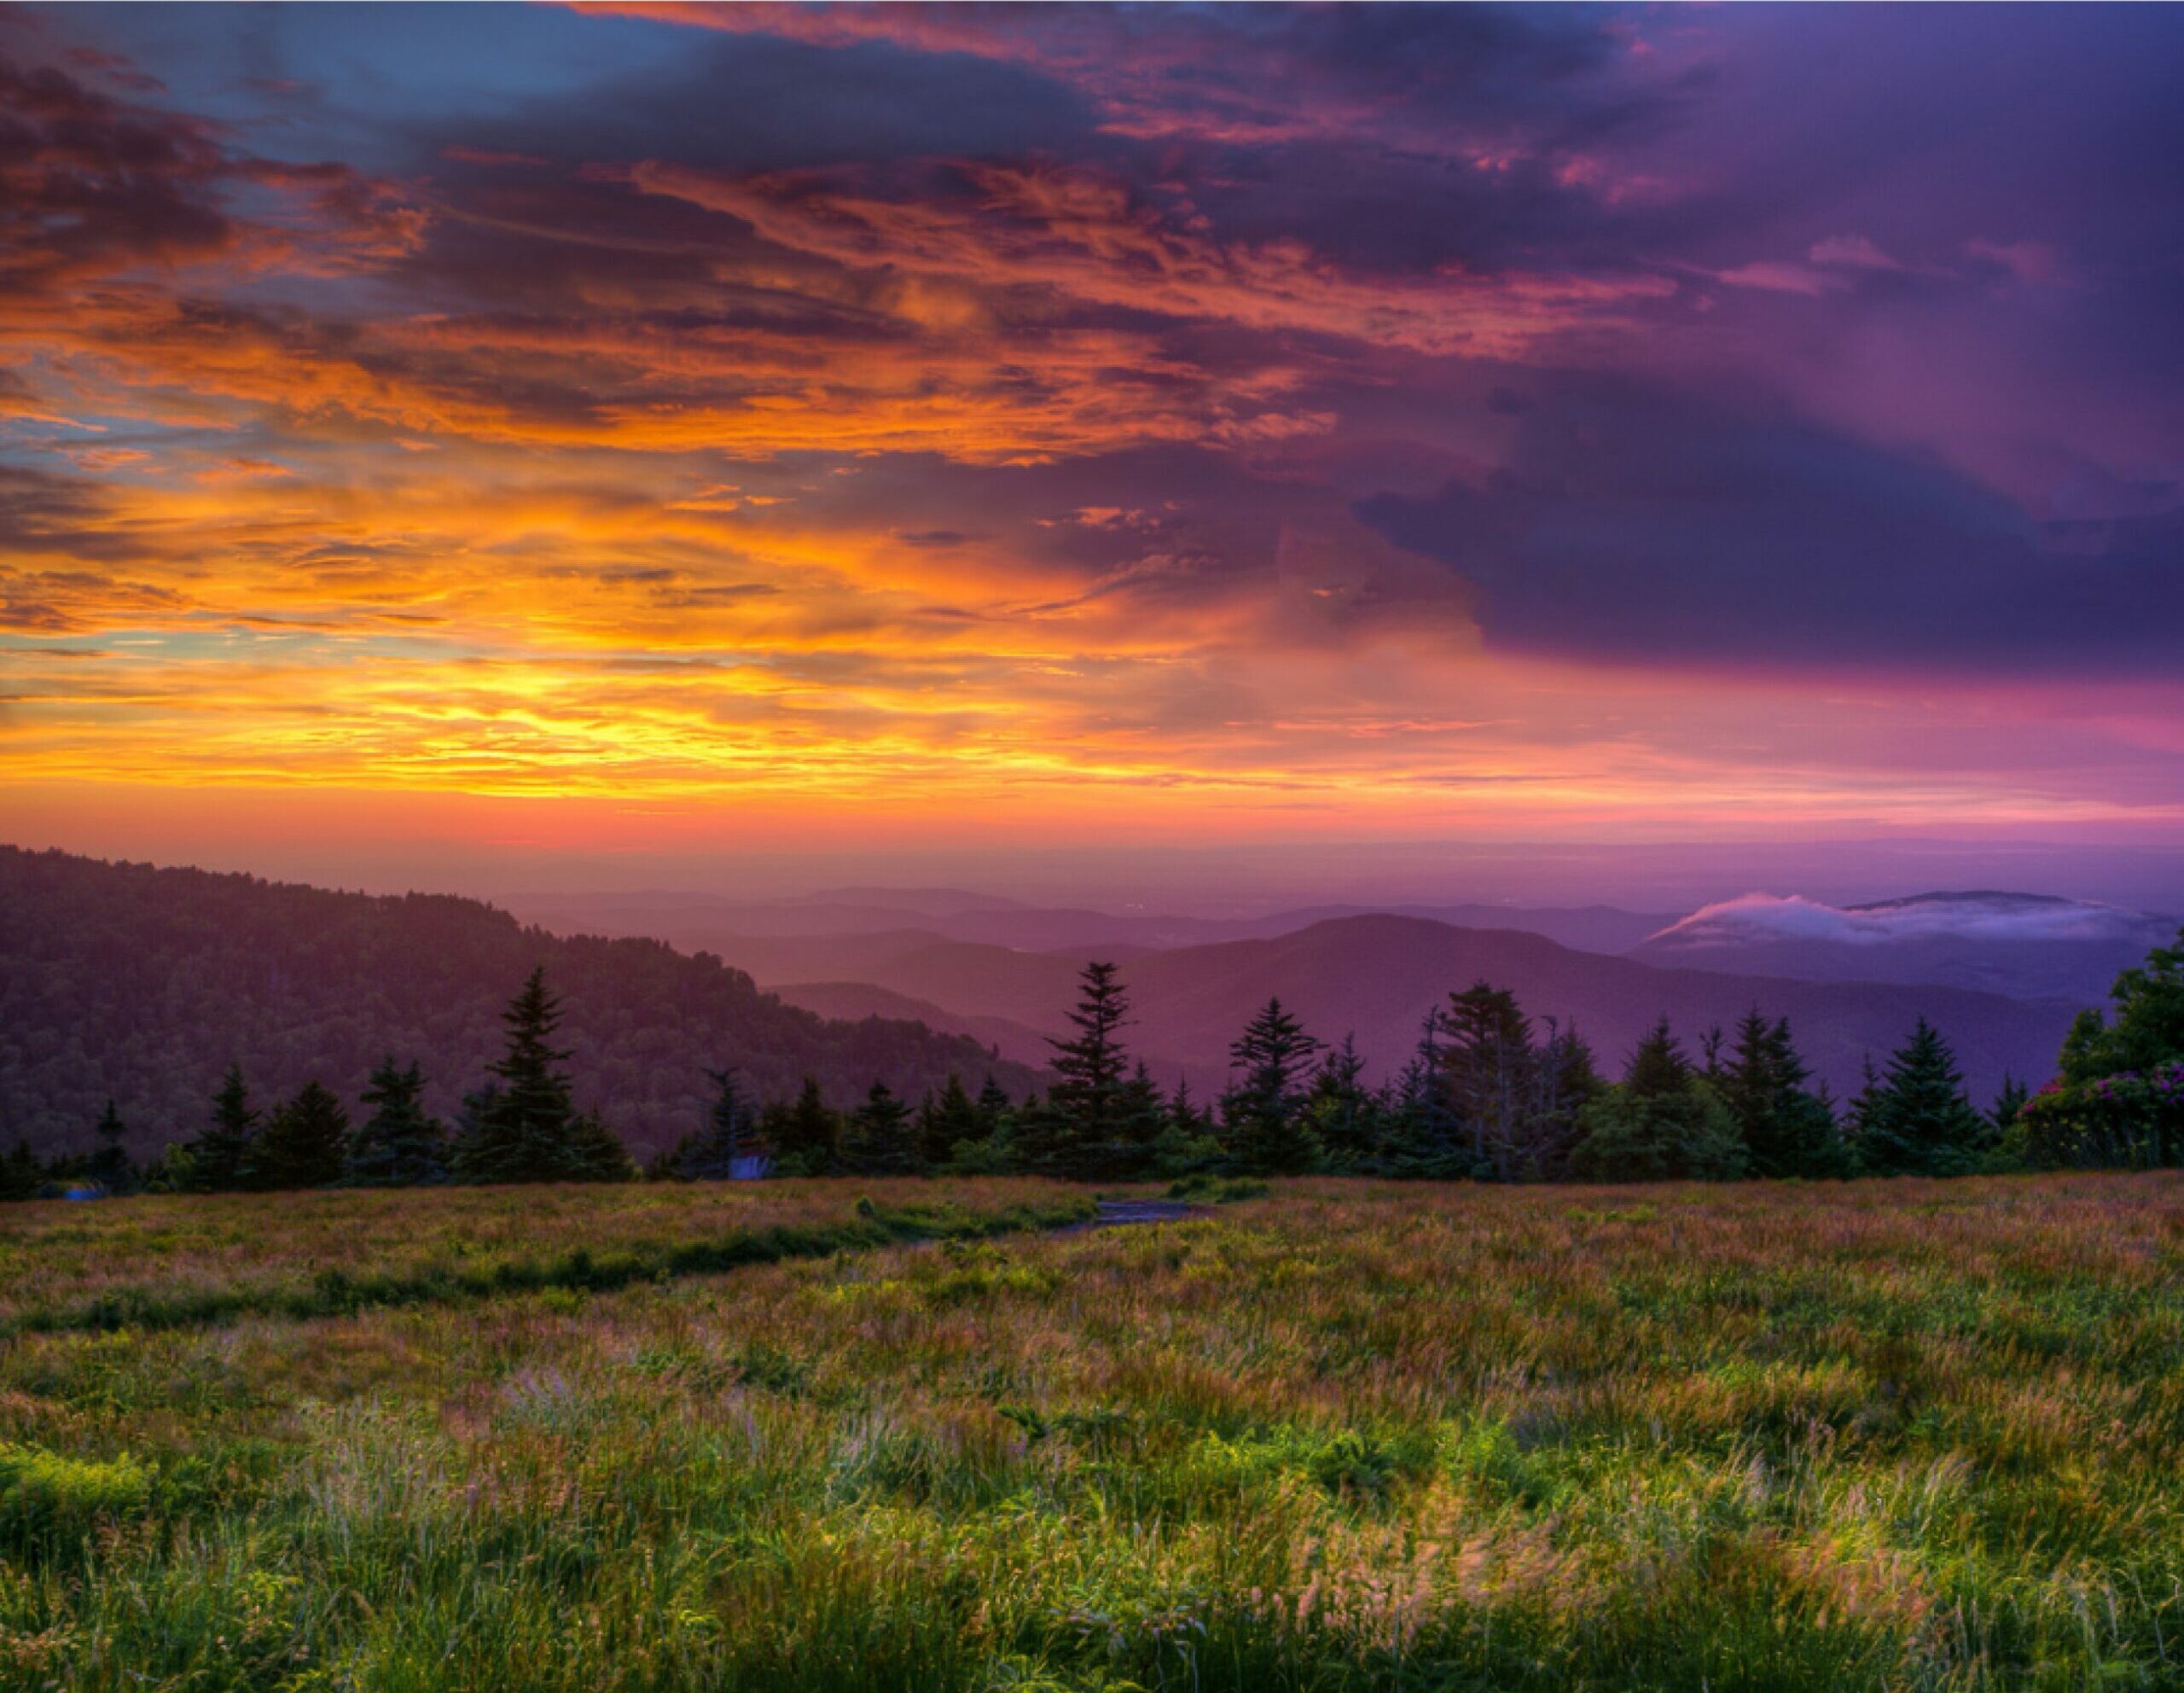 2nd Place Landscape Winner, "Sunset over Roan Mountain State Park" by Josh Tullock. Photo features a saturated sunset over a meadow of flowers and wild grasses, looking out onto the valley in the distance